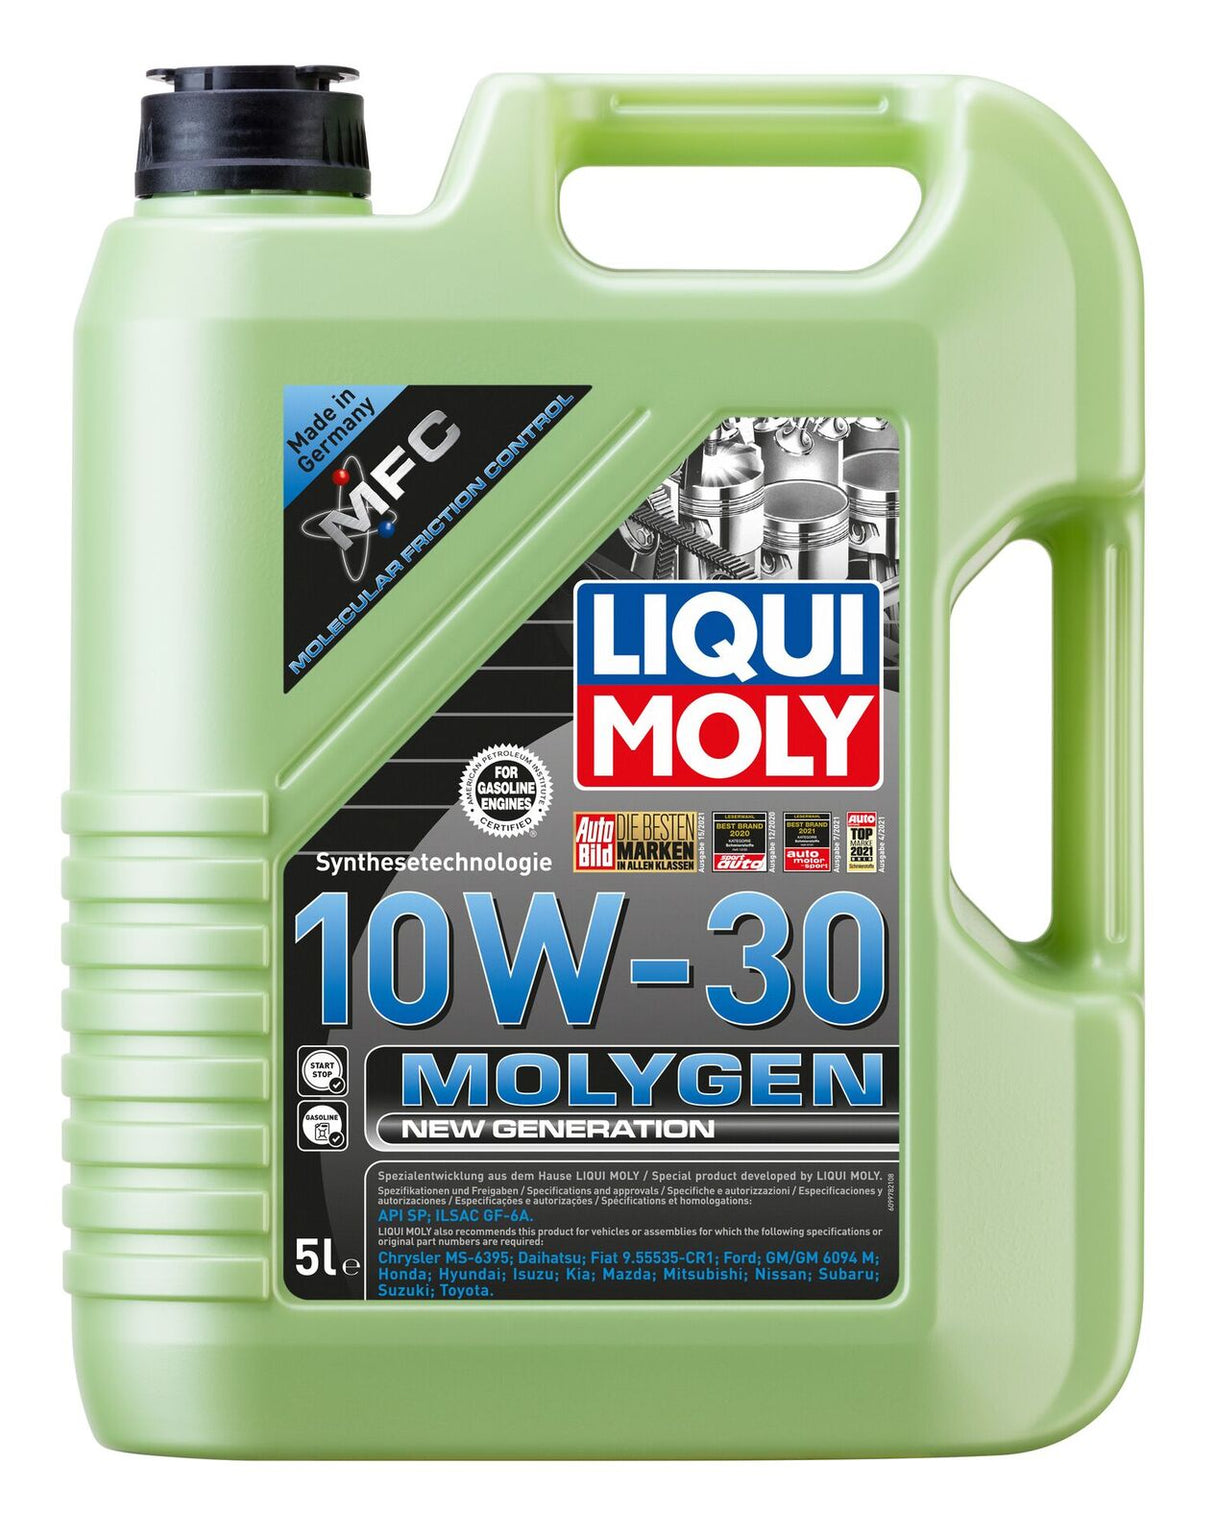 Liqui Moly Top Tec 4600 5W-30 Modern Motor Oil Synthetic Technology of 4 5L